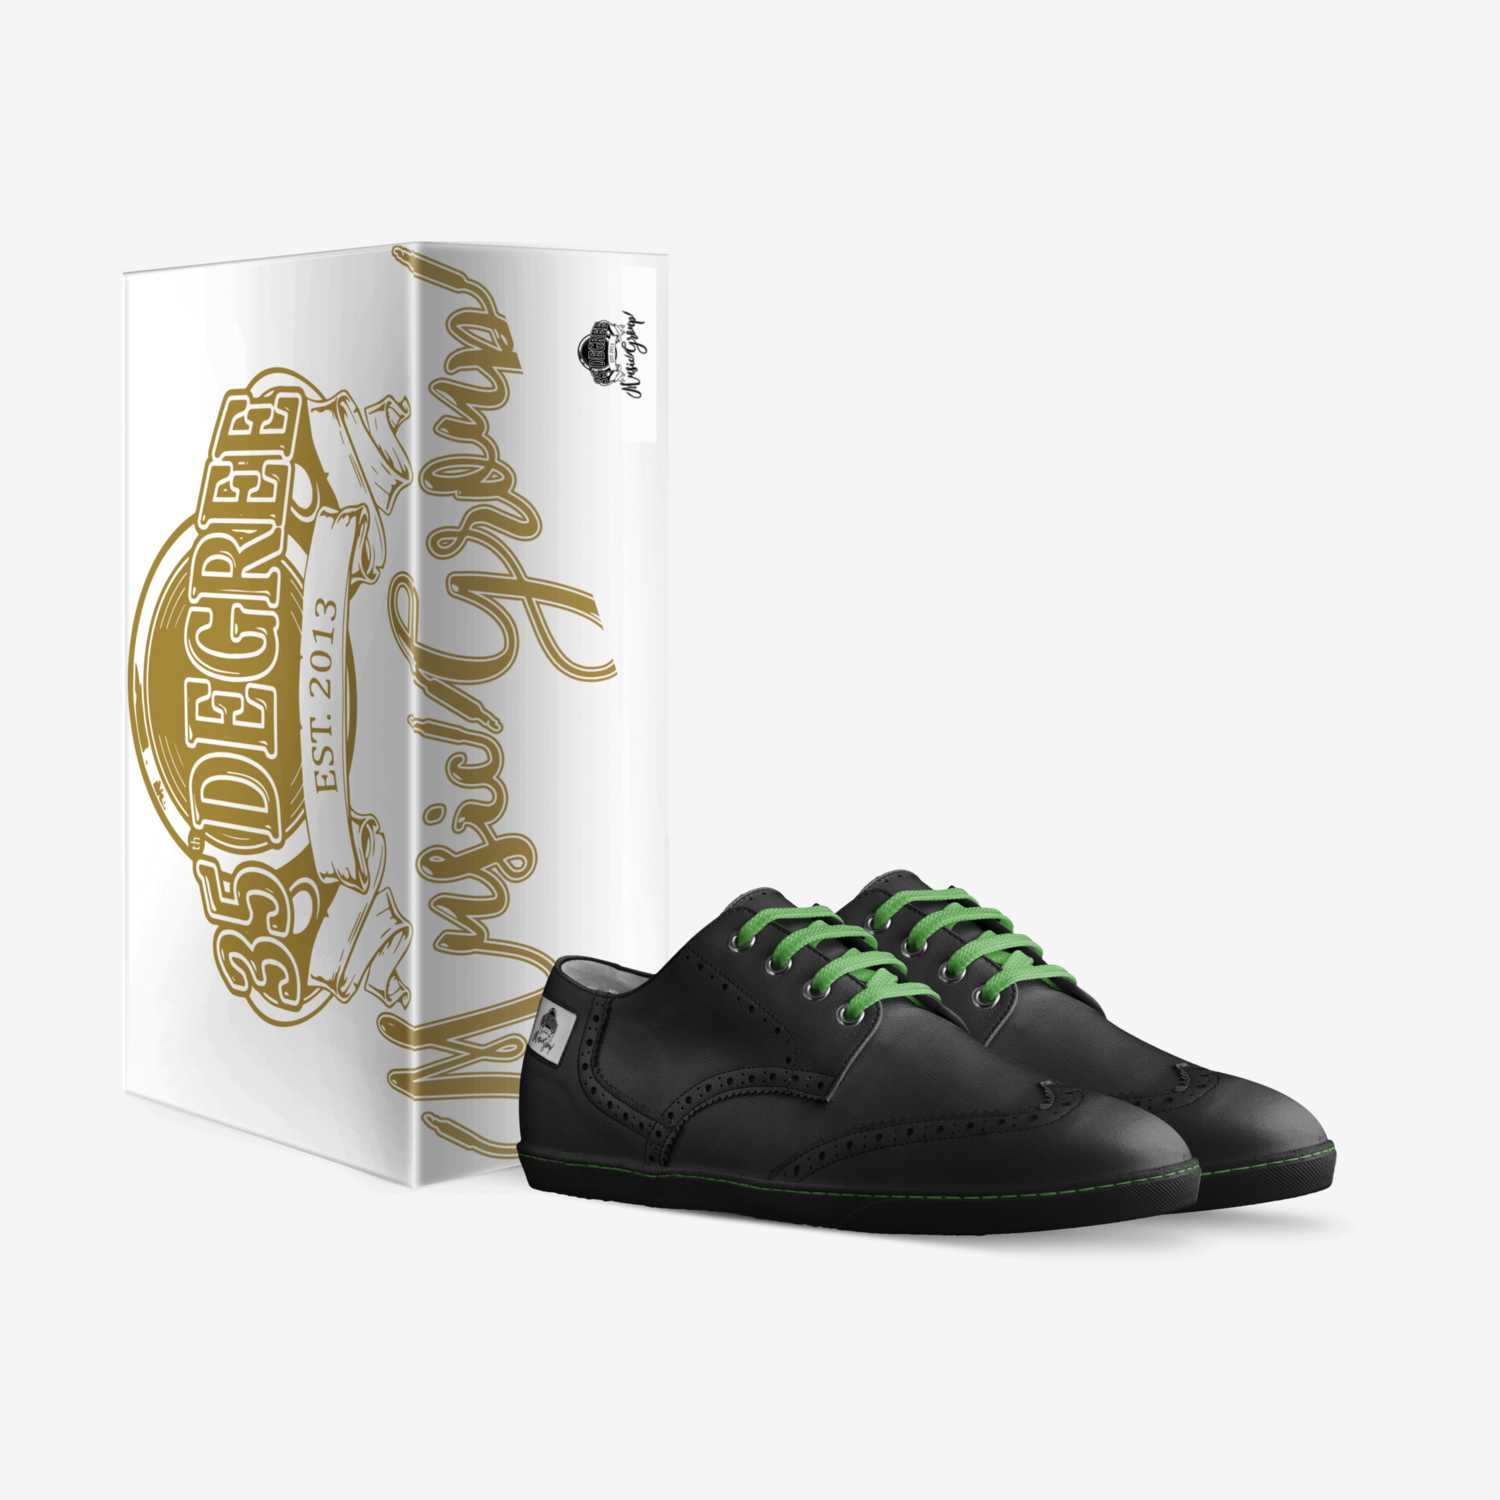 MAsterminds 35 custom made in Italy shoes by Carlos Diaz | Box view